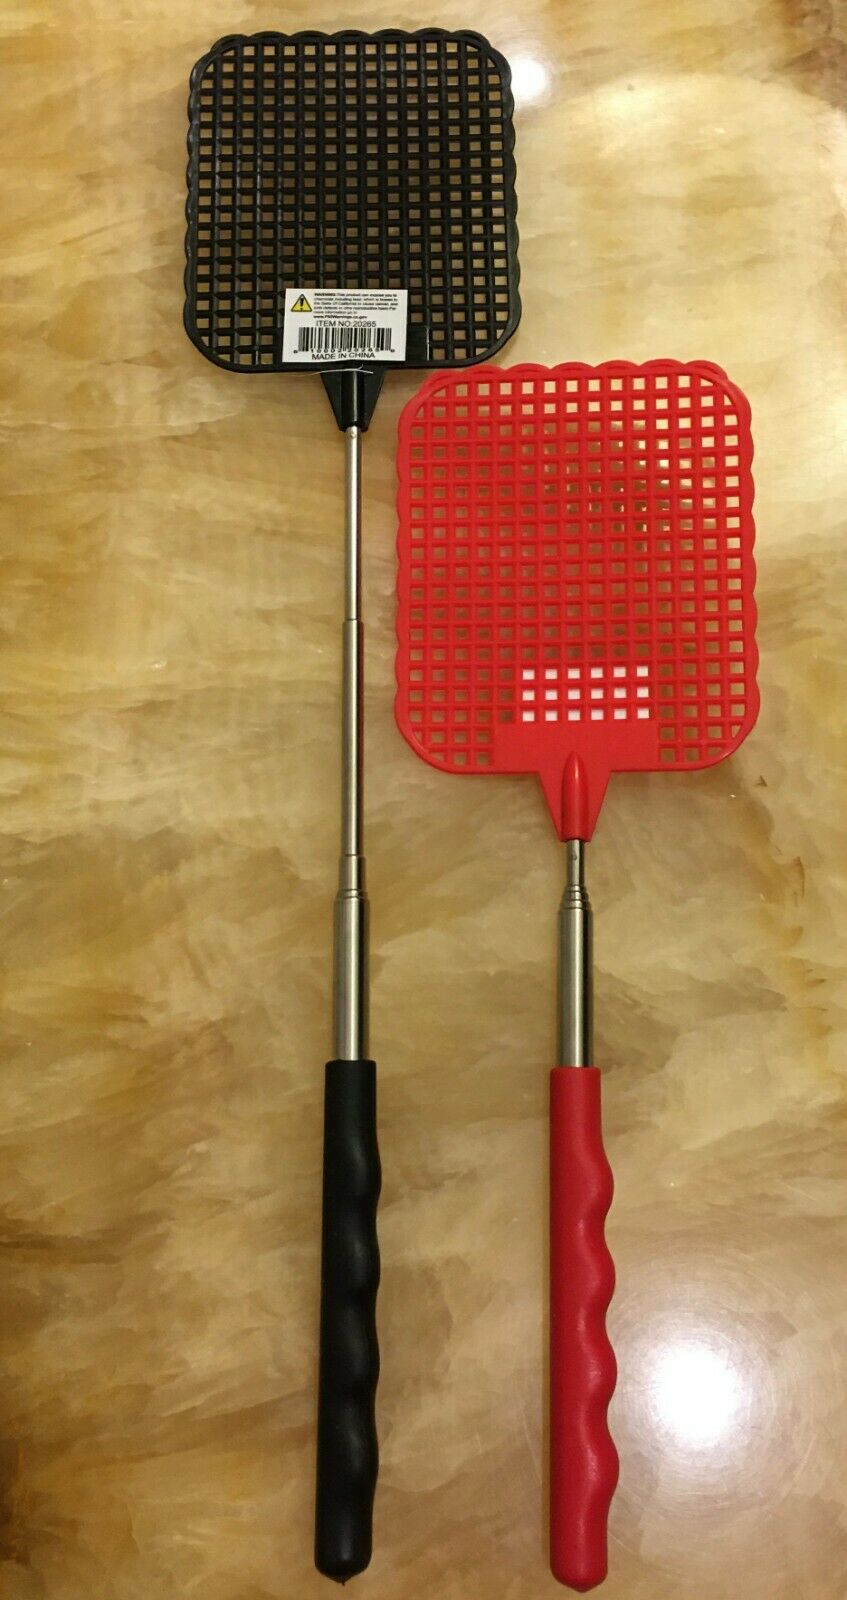 Fly Swatter Plastic Bug Mosquito Insect Killer Telescopic 2 Pack Extendable